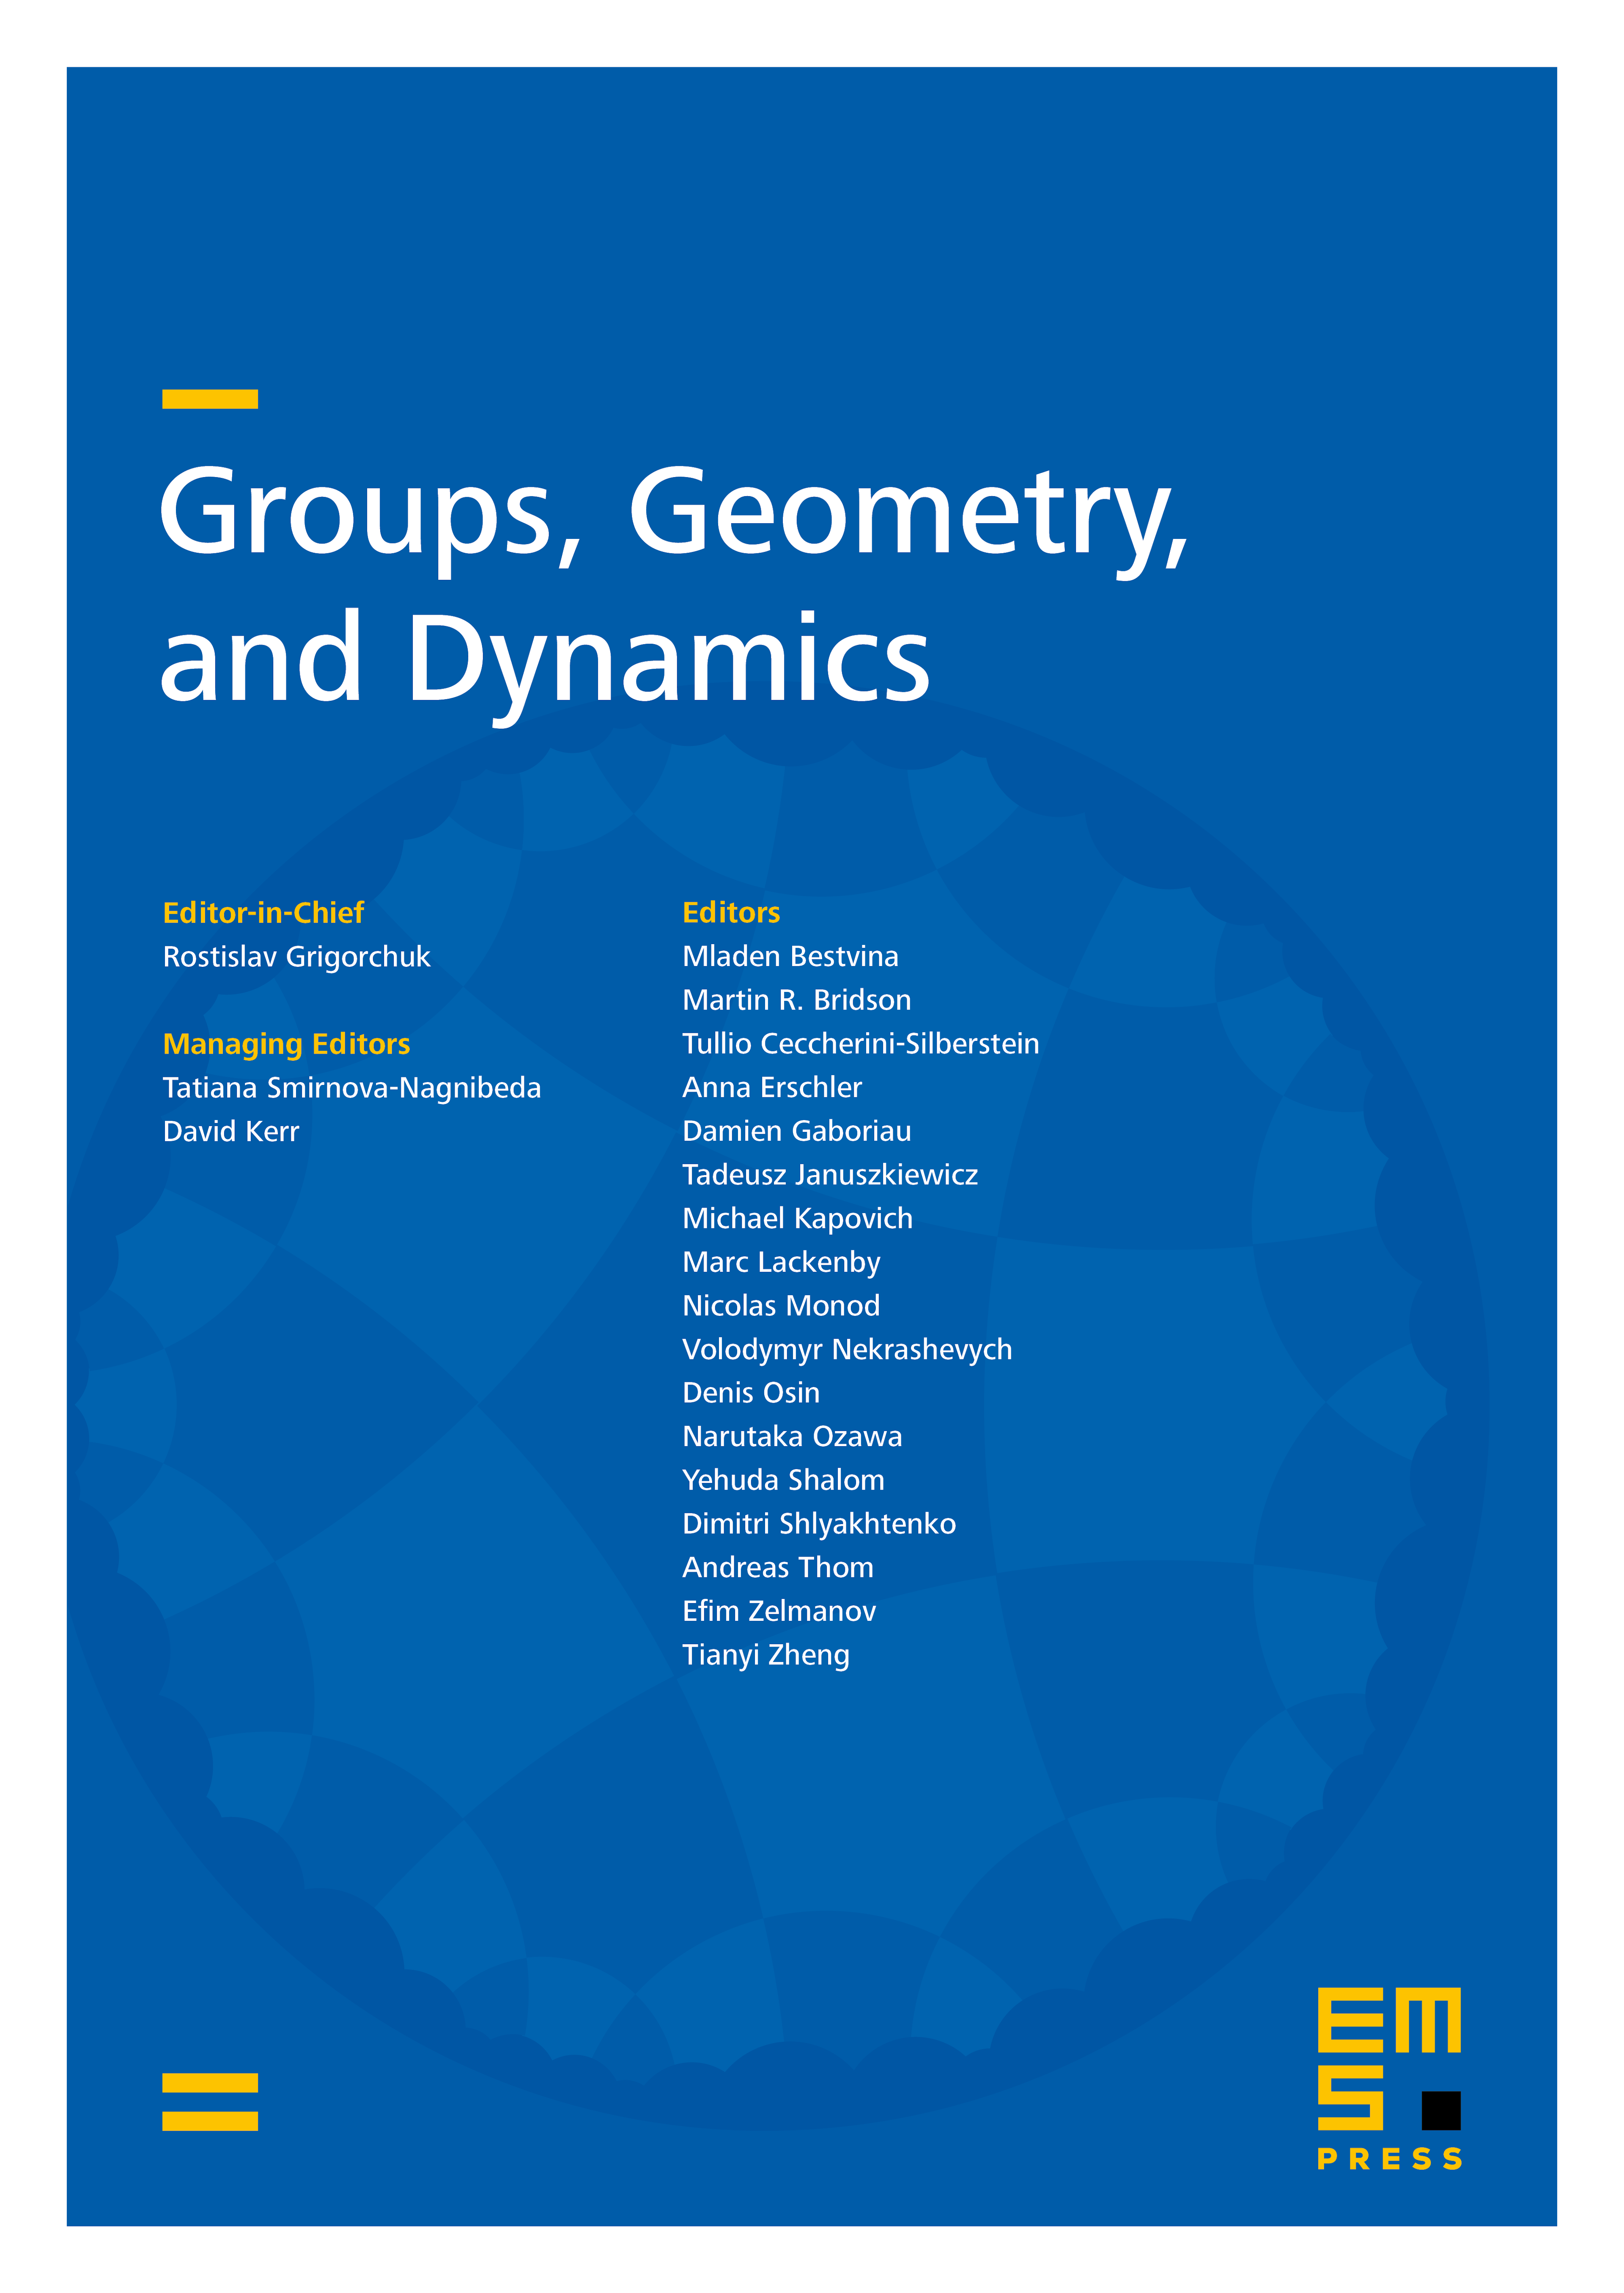 Topological full groups of minimal subshifts and the classification problem for finitely generated complete groups cover